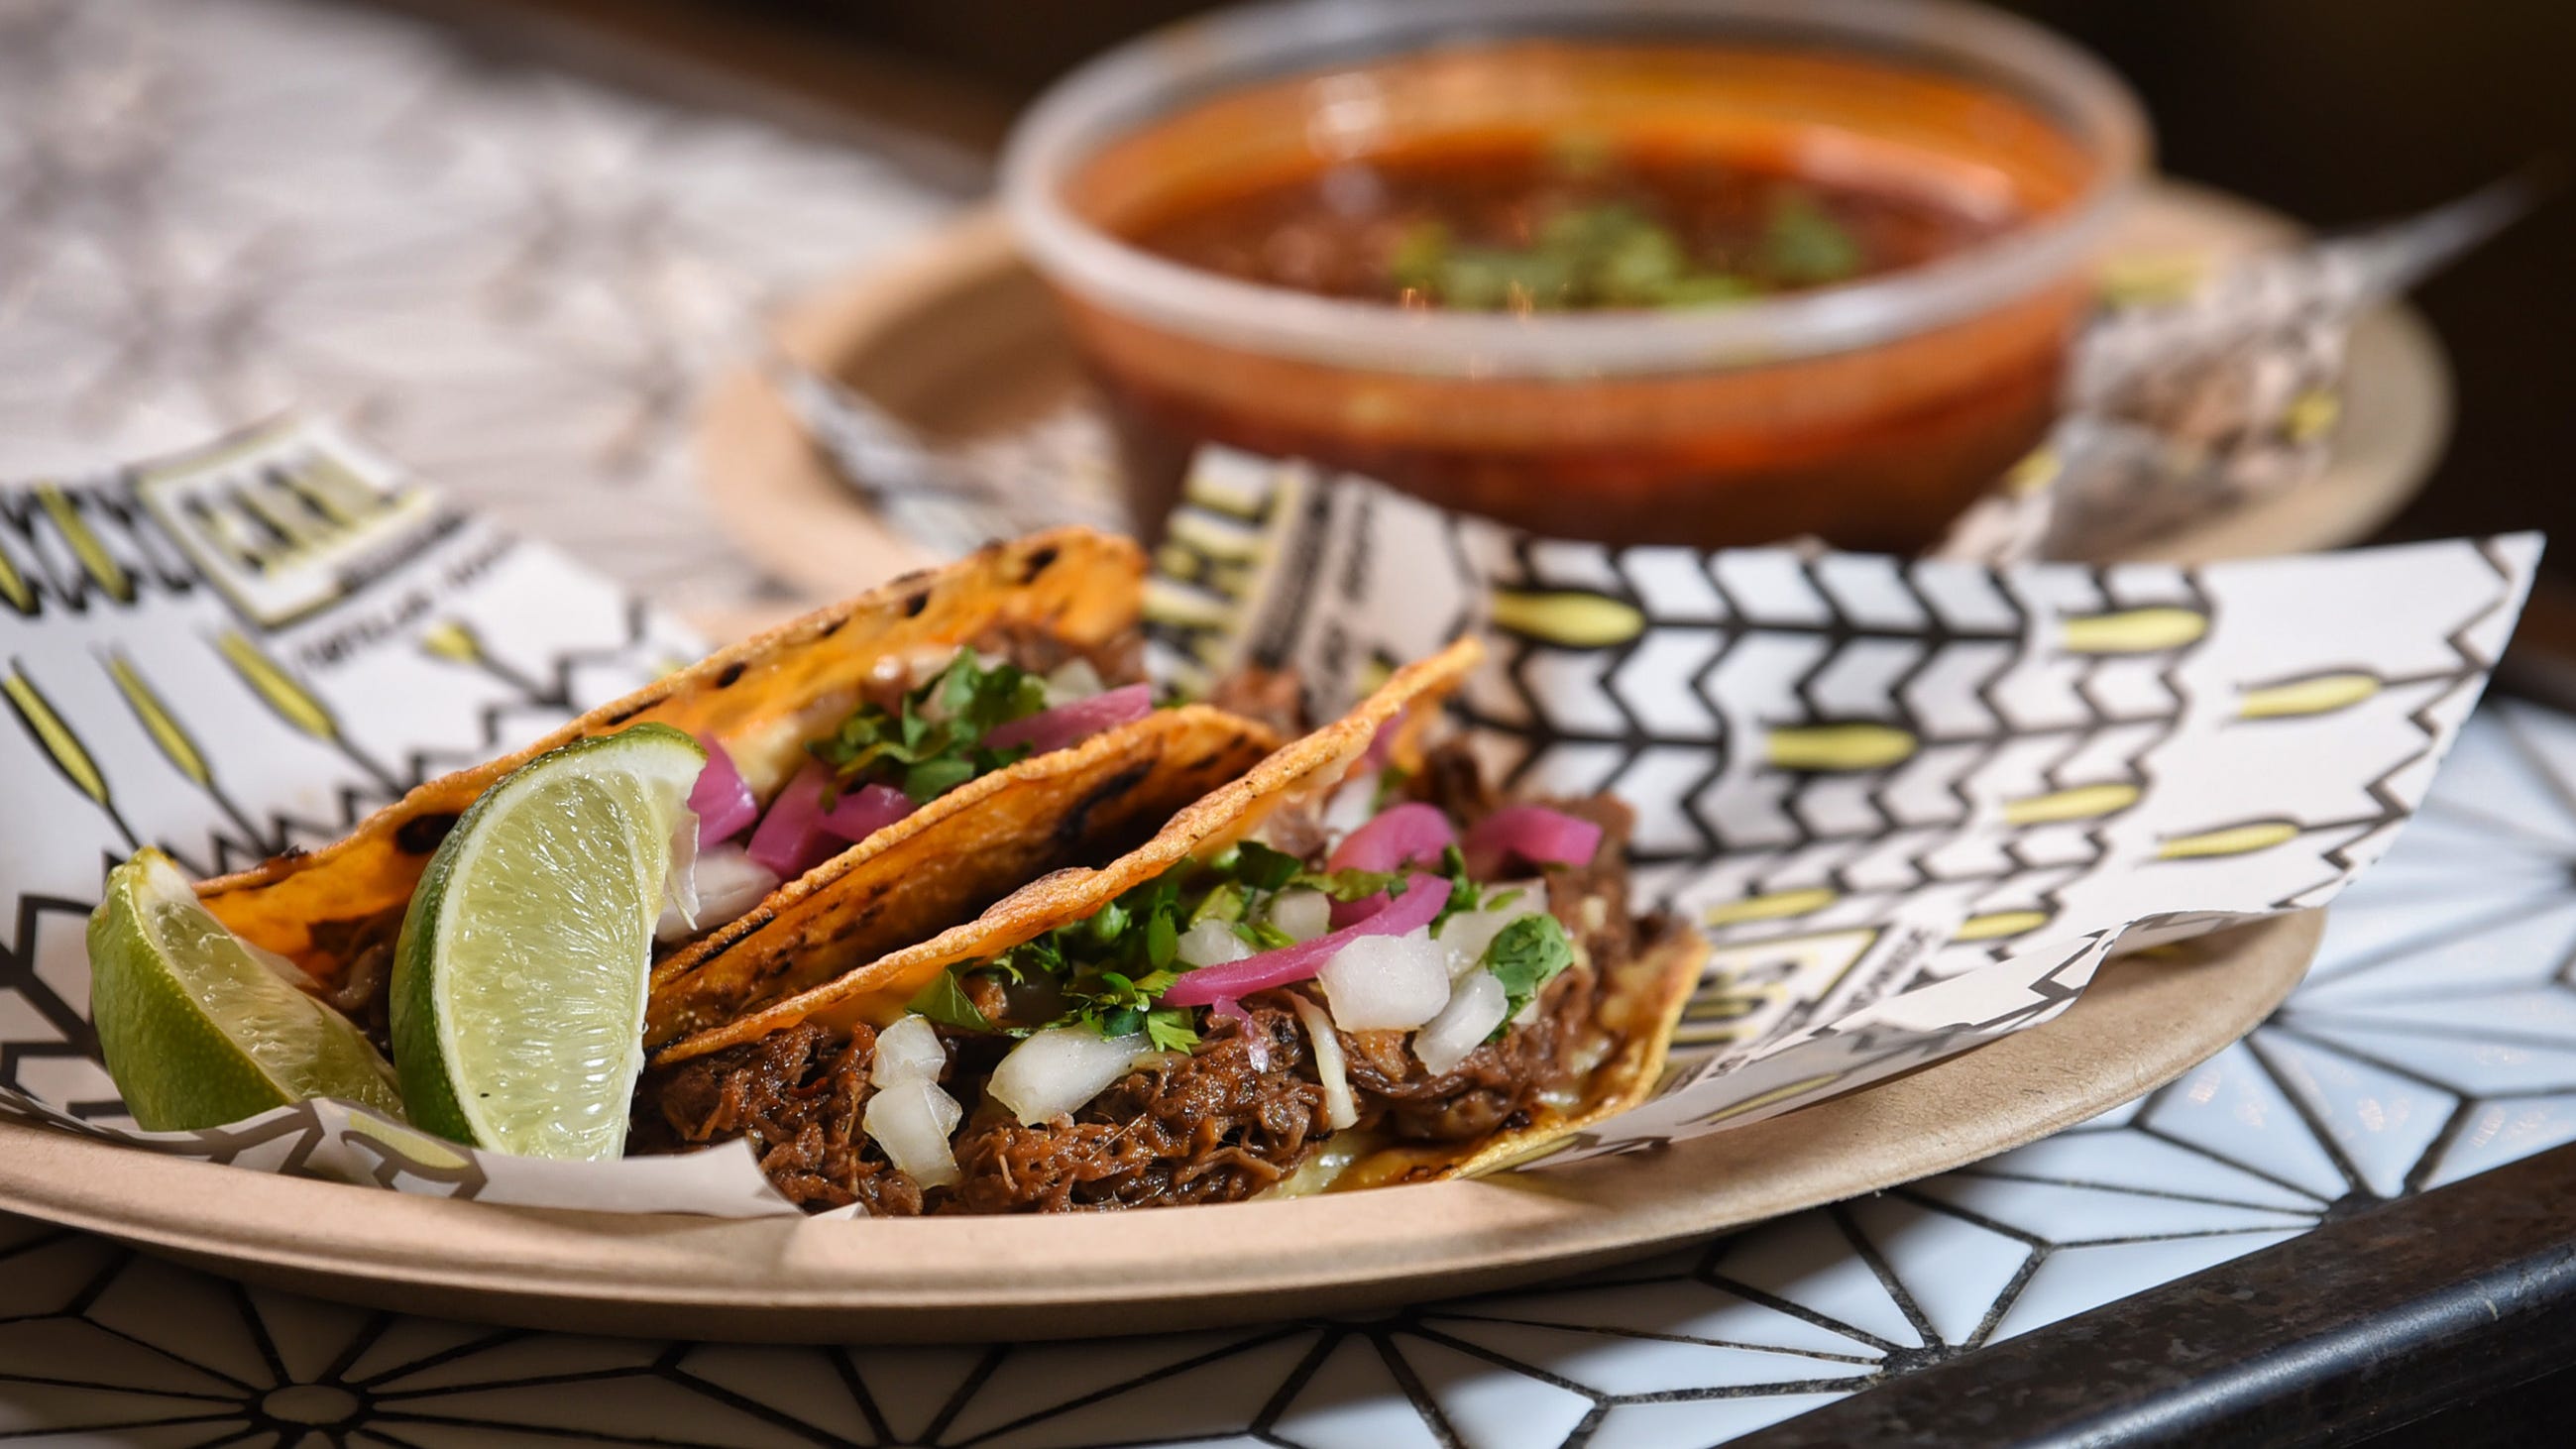 North Jersey birria tacos, quesatacos: Where to find the popular food